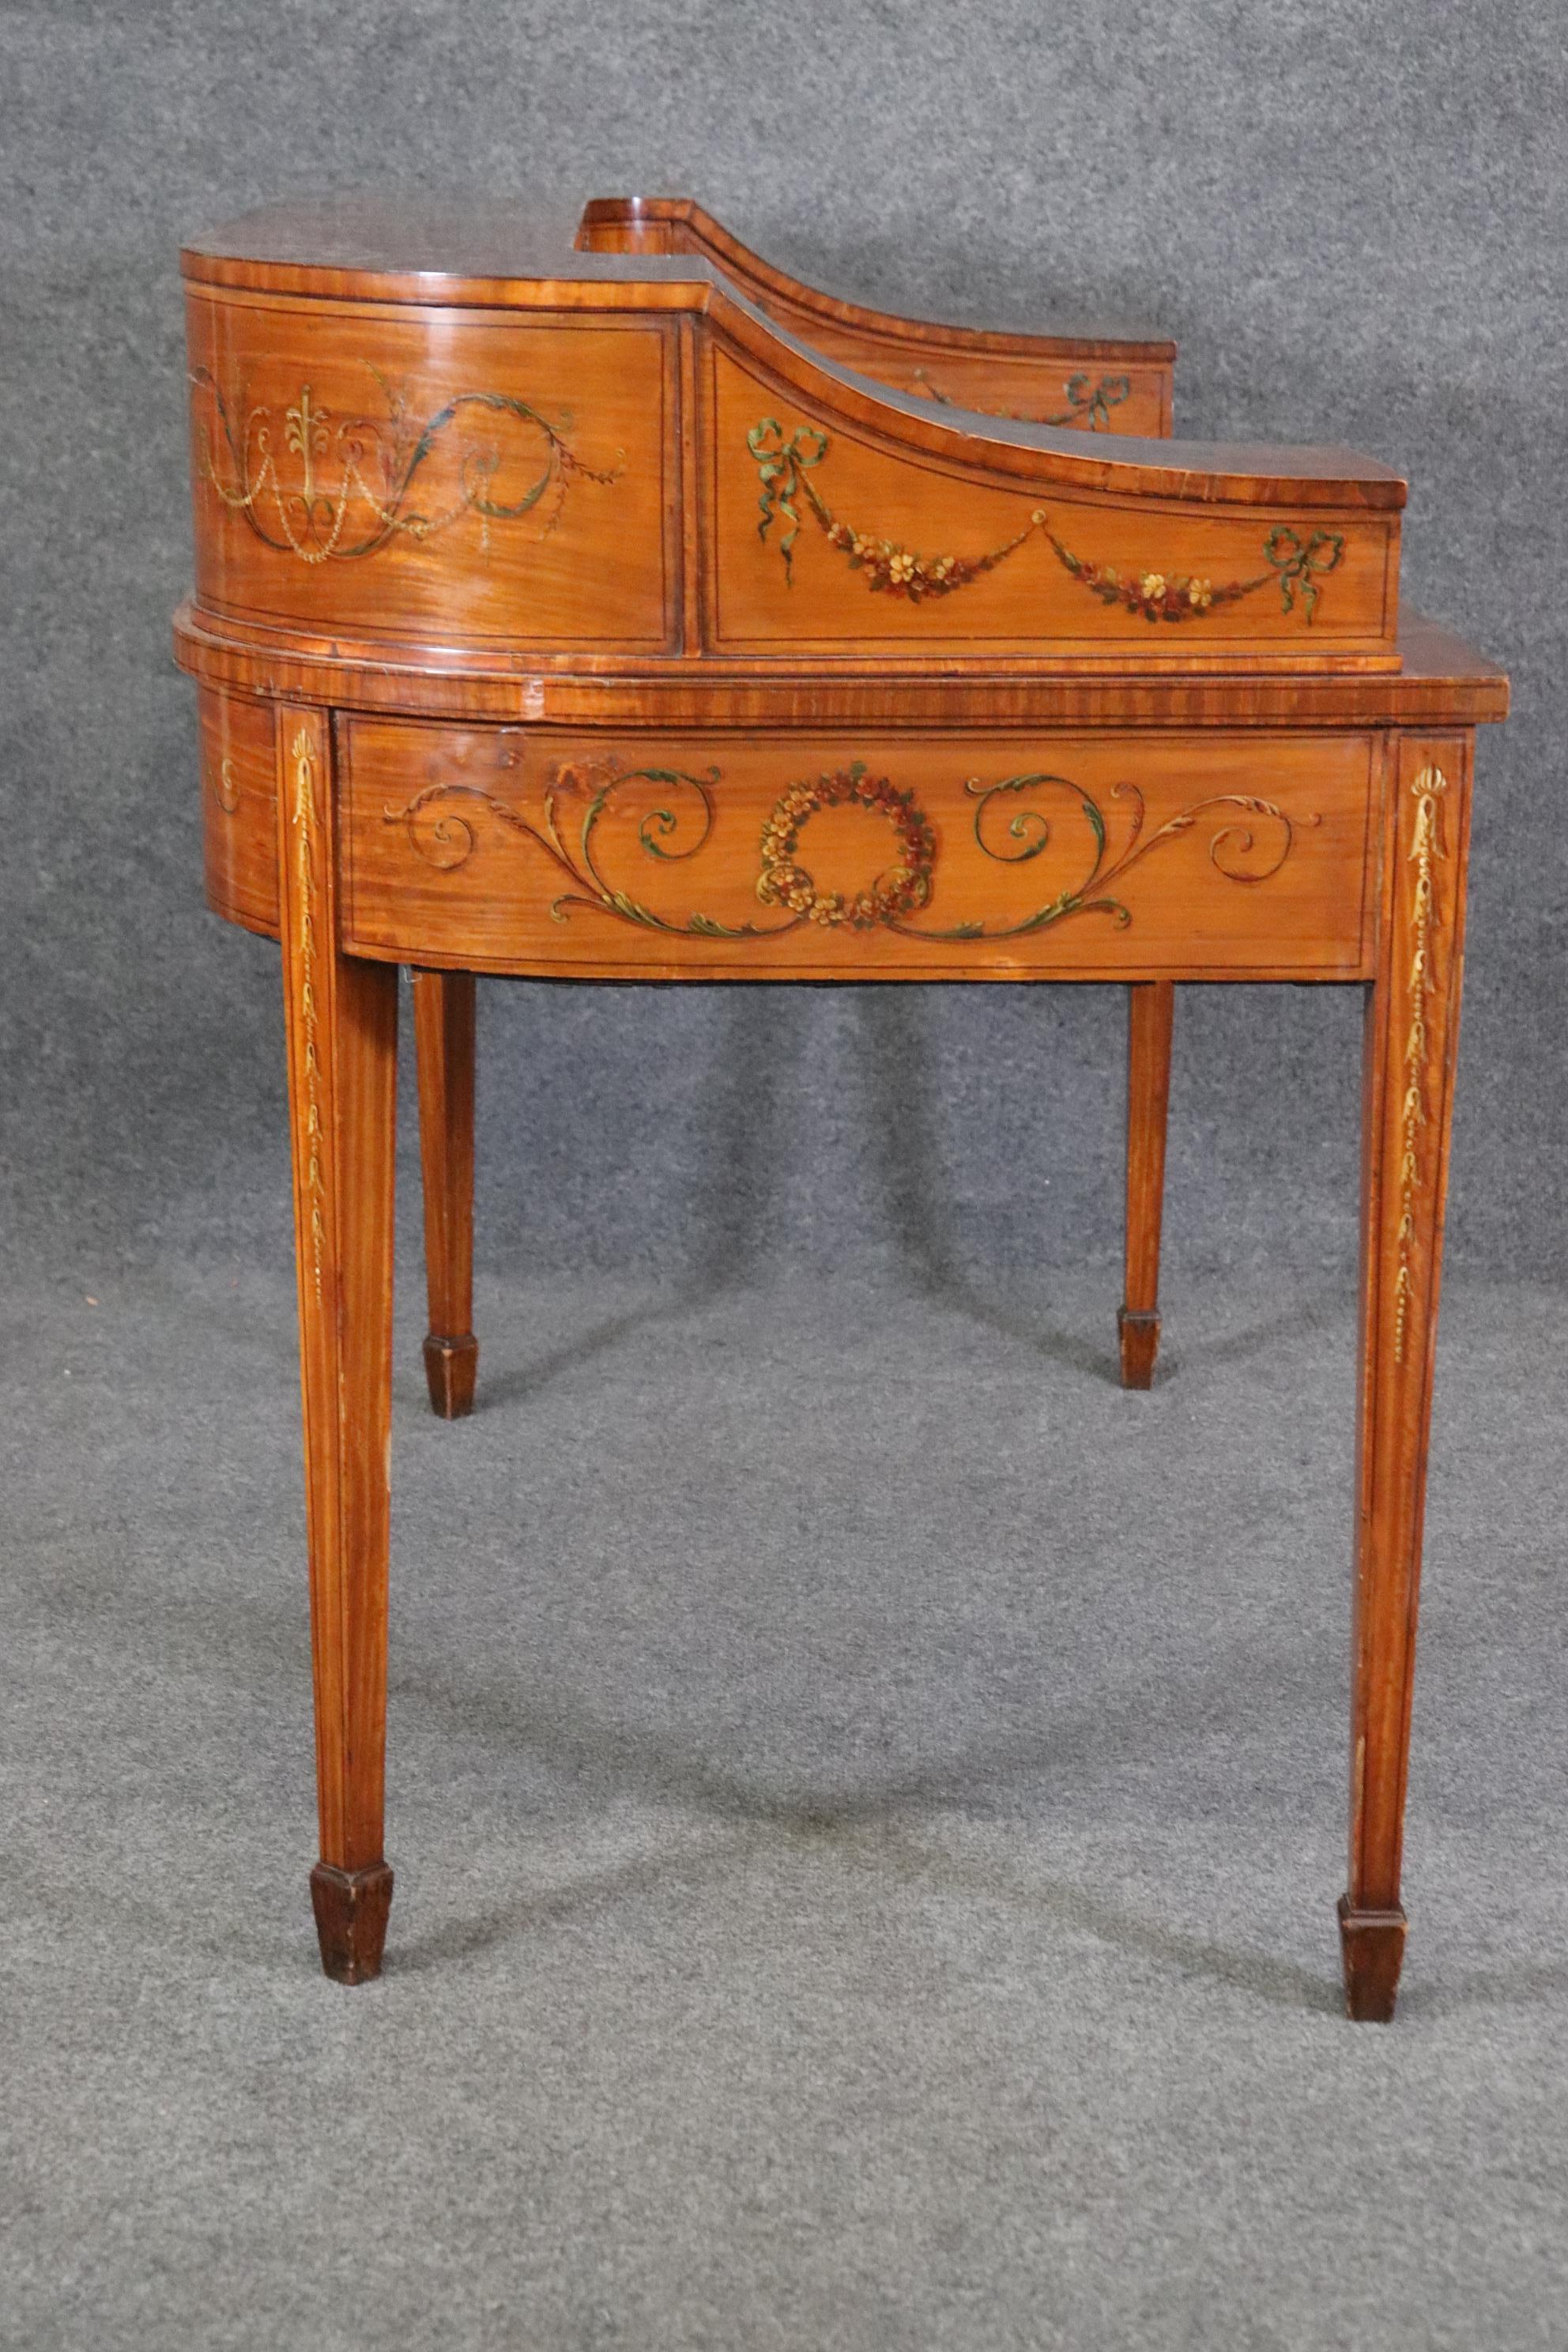 Fine Quality English Satinwood Carlton House Desk with Cherubs and Musical Theme 5